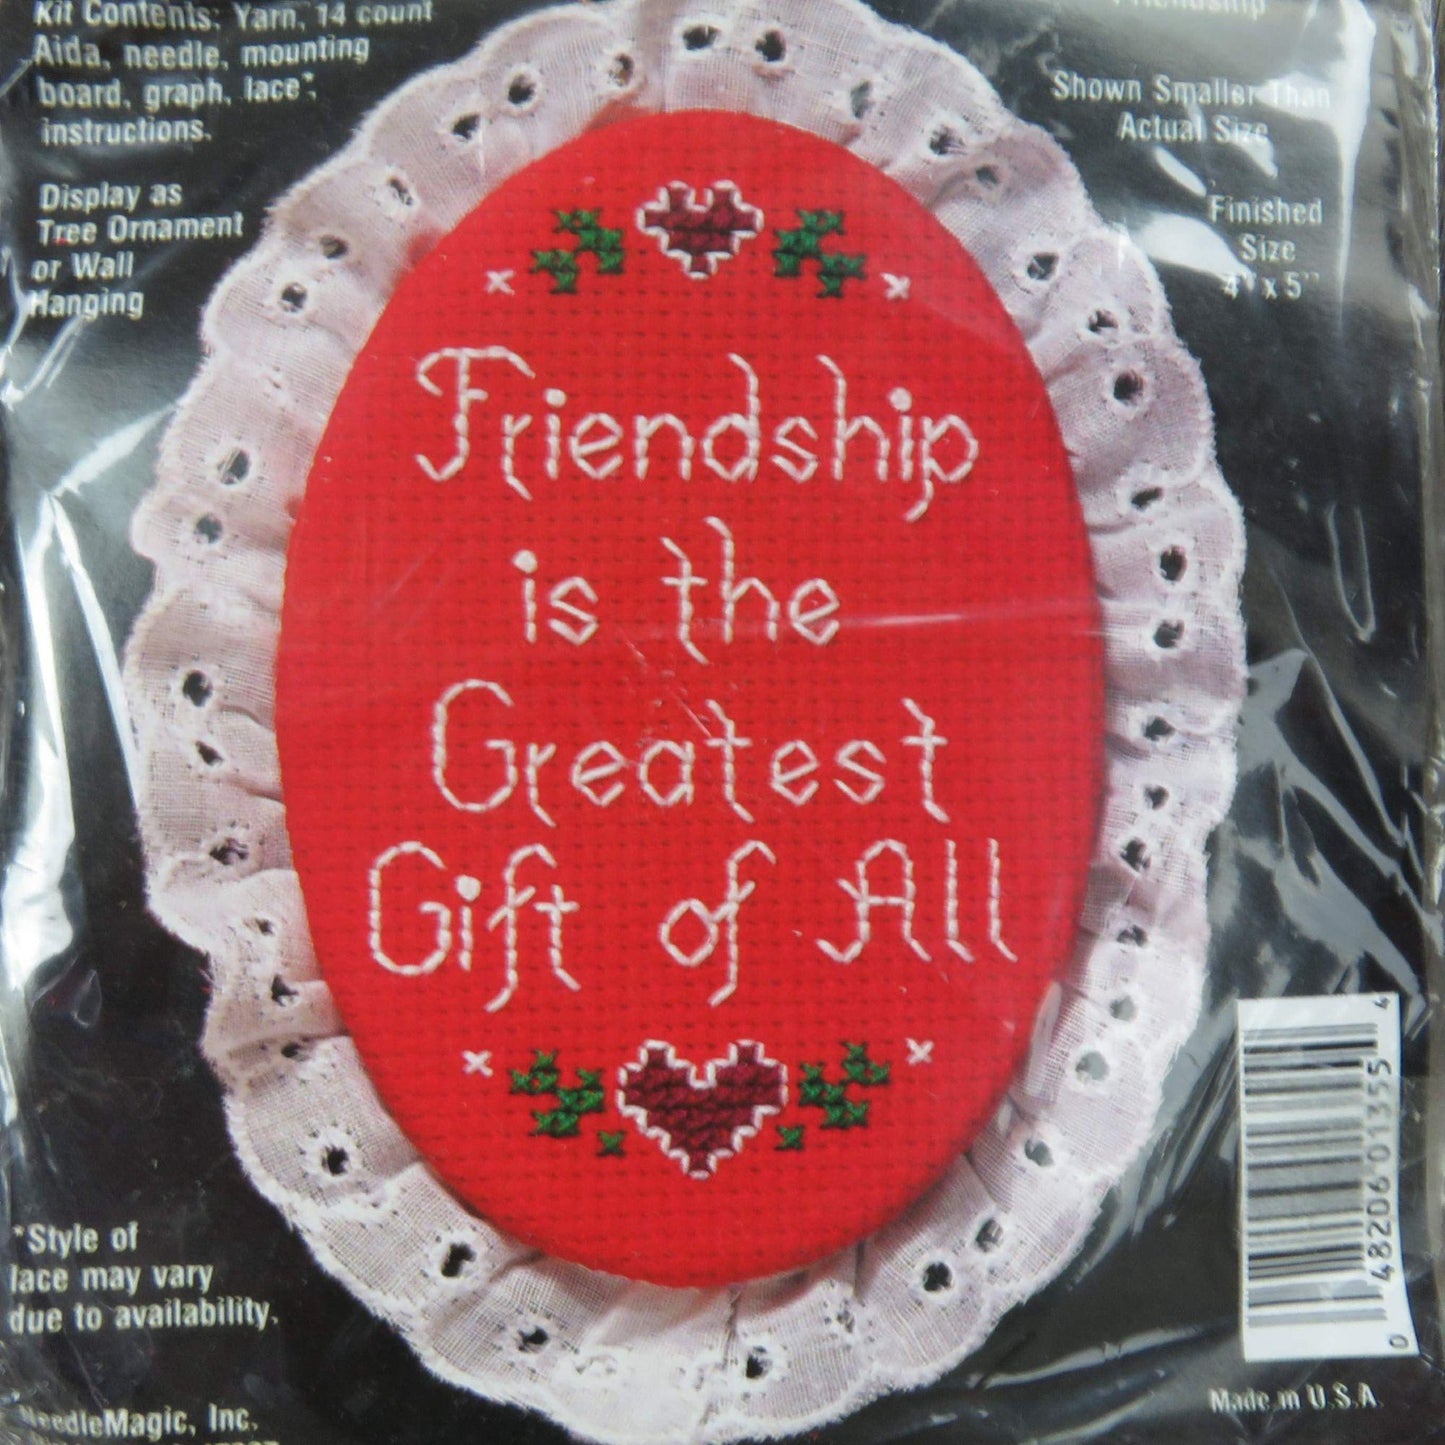 Counted Cross Stitch Ornament Kit Friendship Is Greatest Gift Christmas Craft Kit Needlemagic  1355 4x5